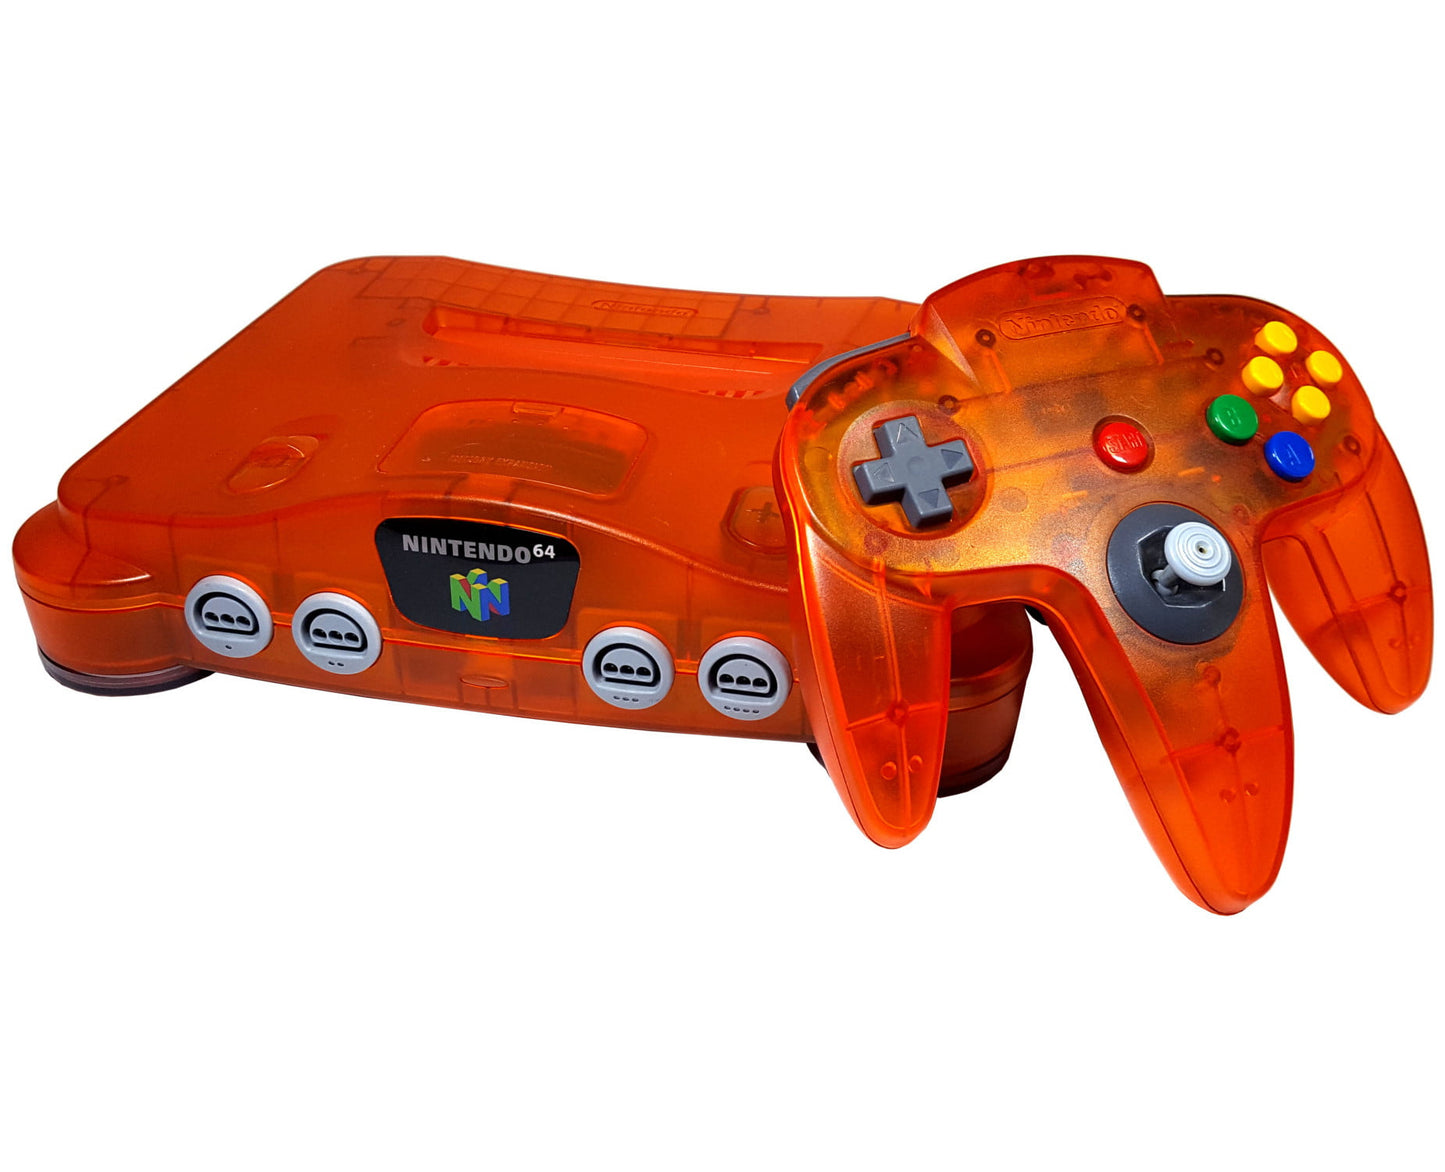 Restored Nintendo 64 System Video Game Console Fire Orange with Matching Controller (Refurbished)